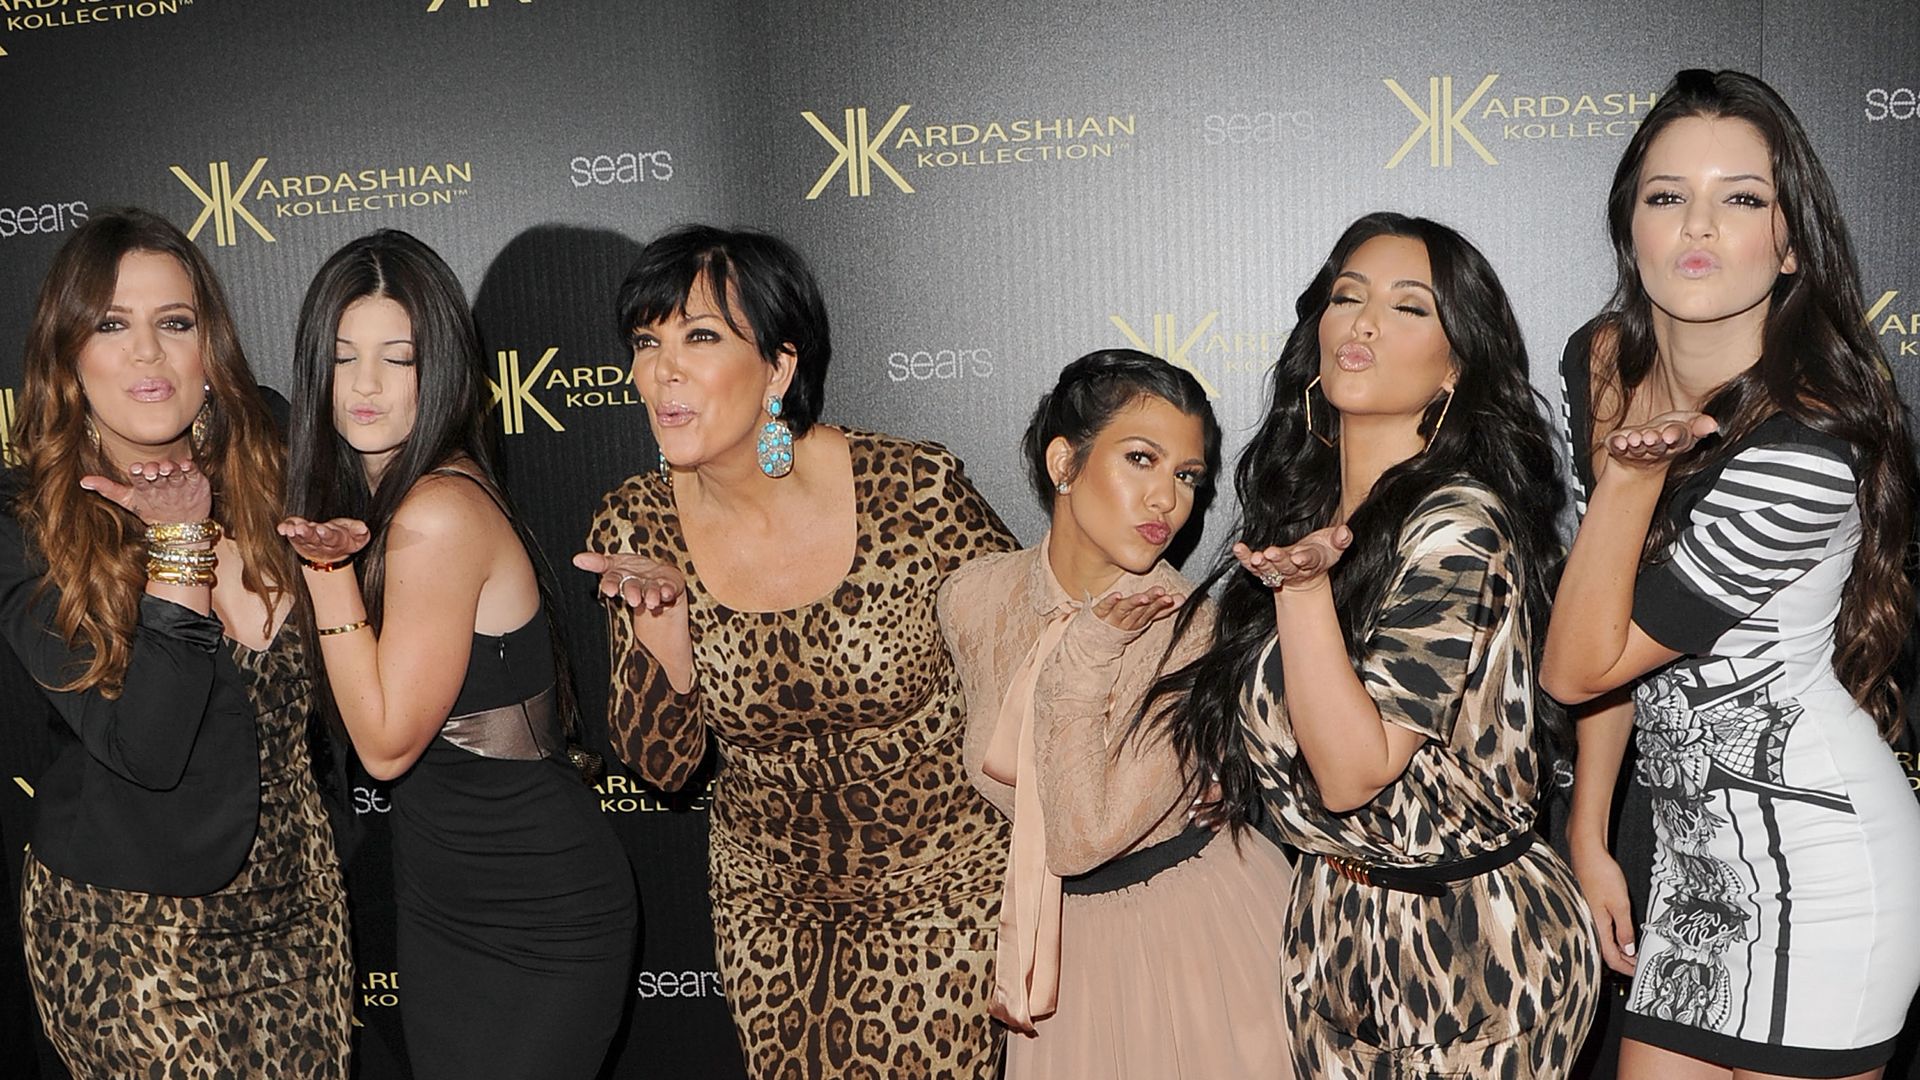 Khloe Kardasian, Kylie Jenner, Kris Kardashian, Kourtney Kardashian, Kim Kardashian, and Kendall Jenner attend the Kardashian Kollection Launch Party at The Colony on August 17, 2011 in Hollywood, California.